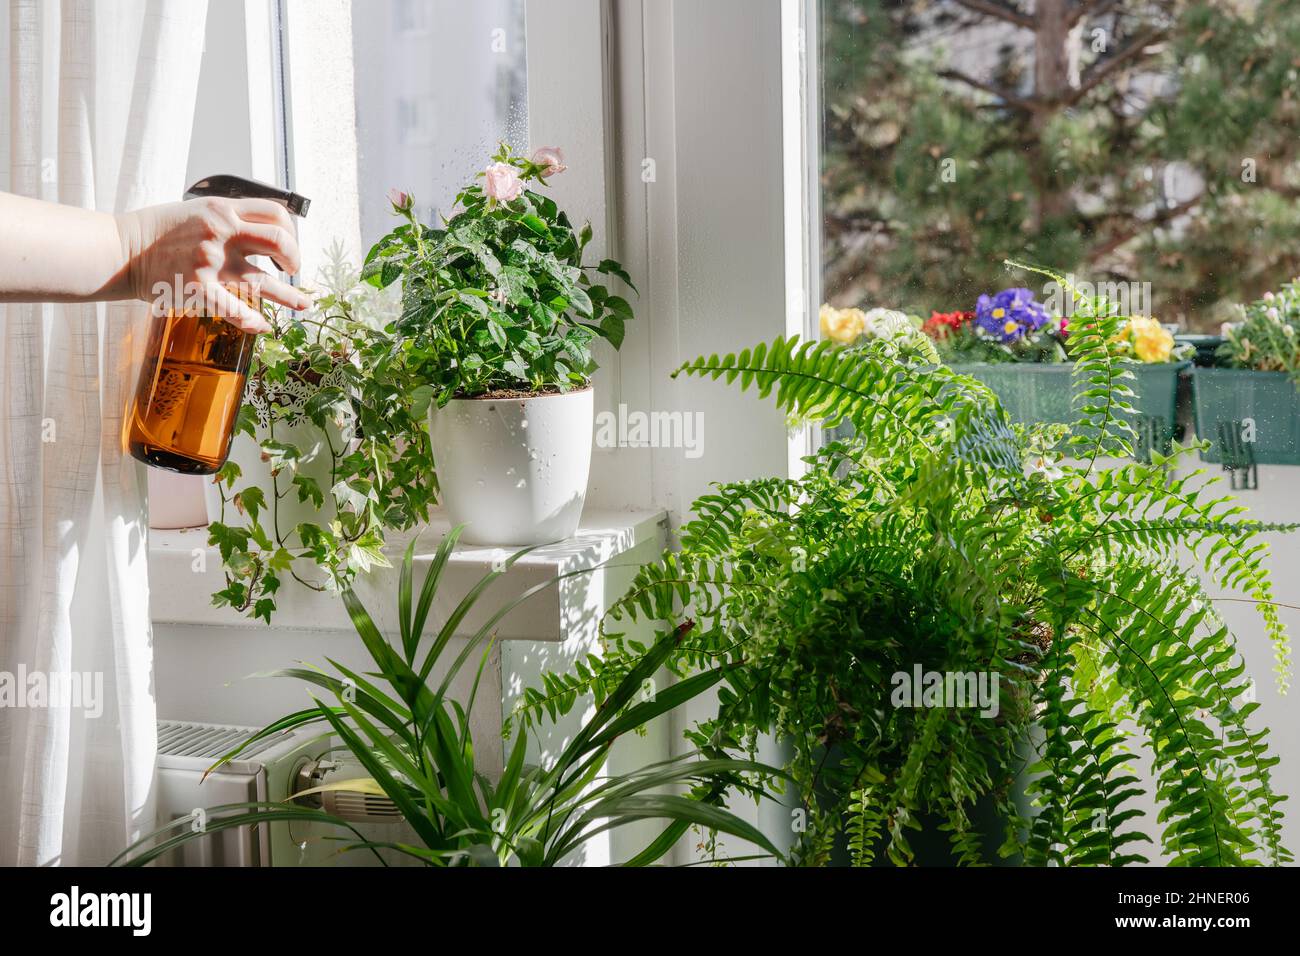 Woman taking care and watering dry indoor green plants. Home gardening and urban jungle concept Stock Photo